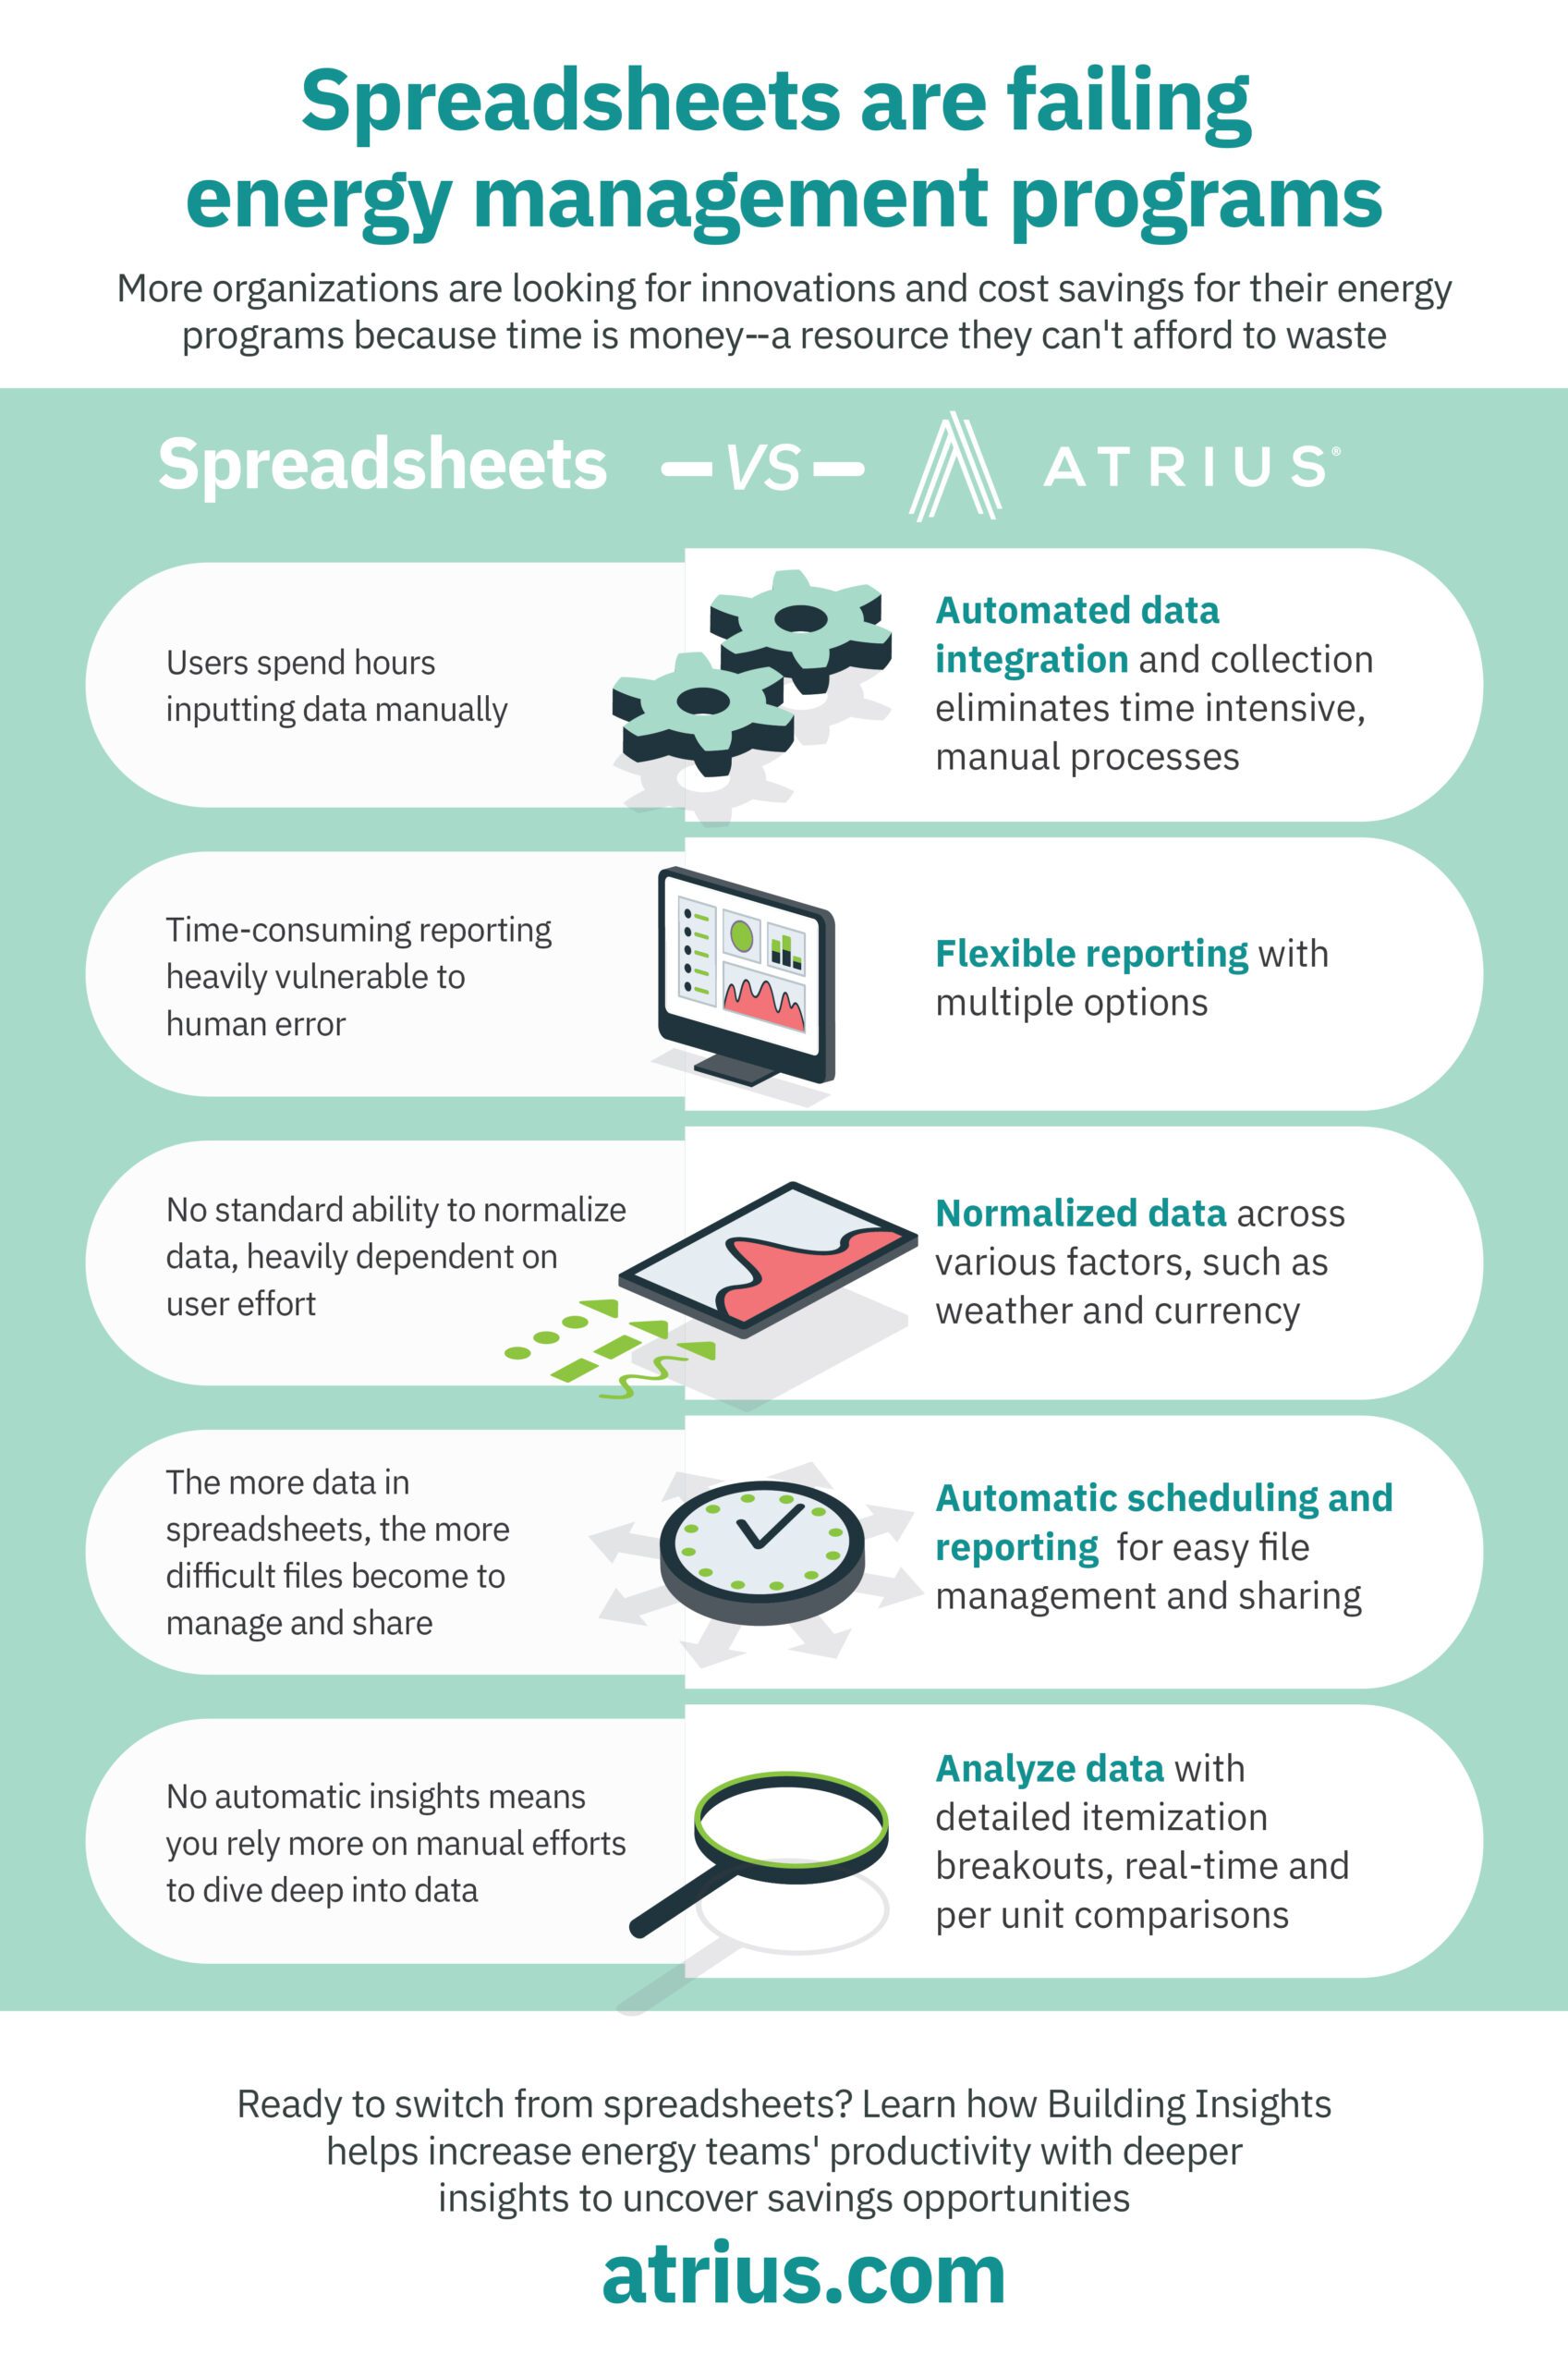 Why Spreadsheets Fail Energy Managers